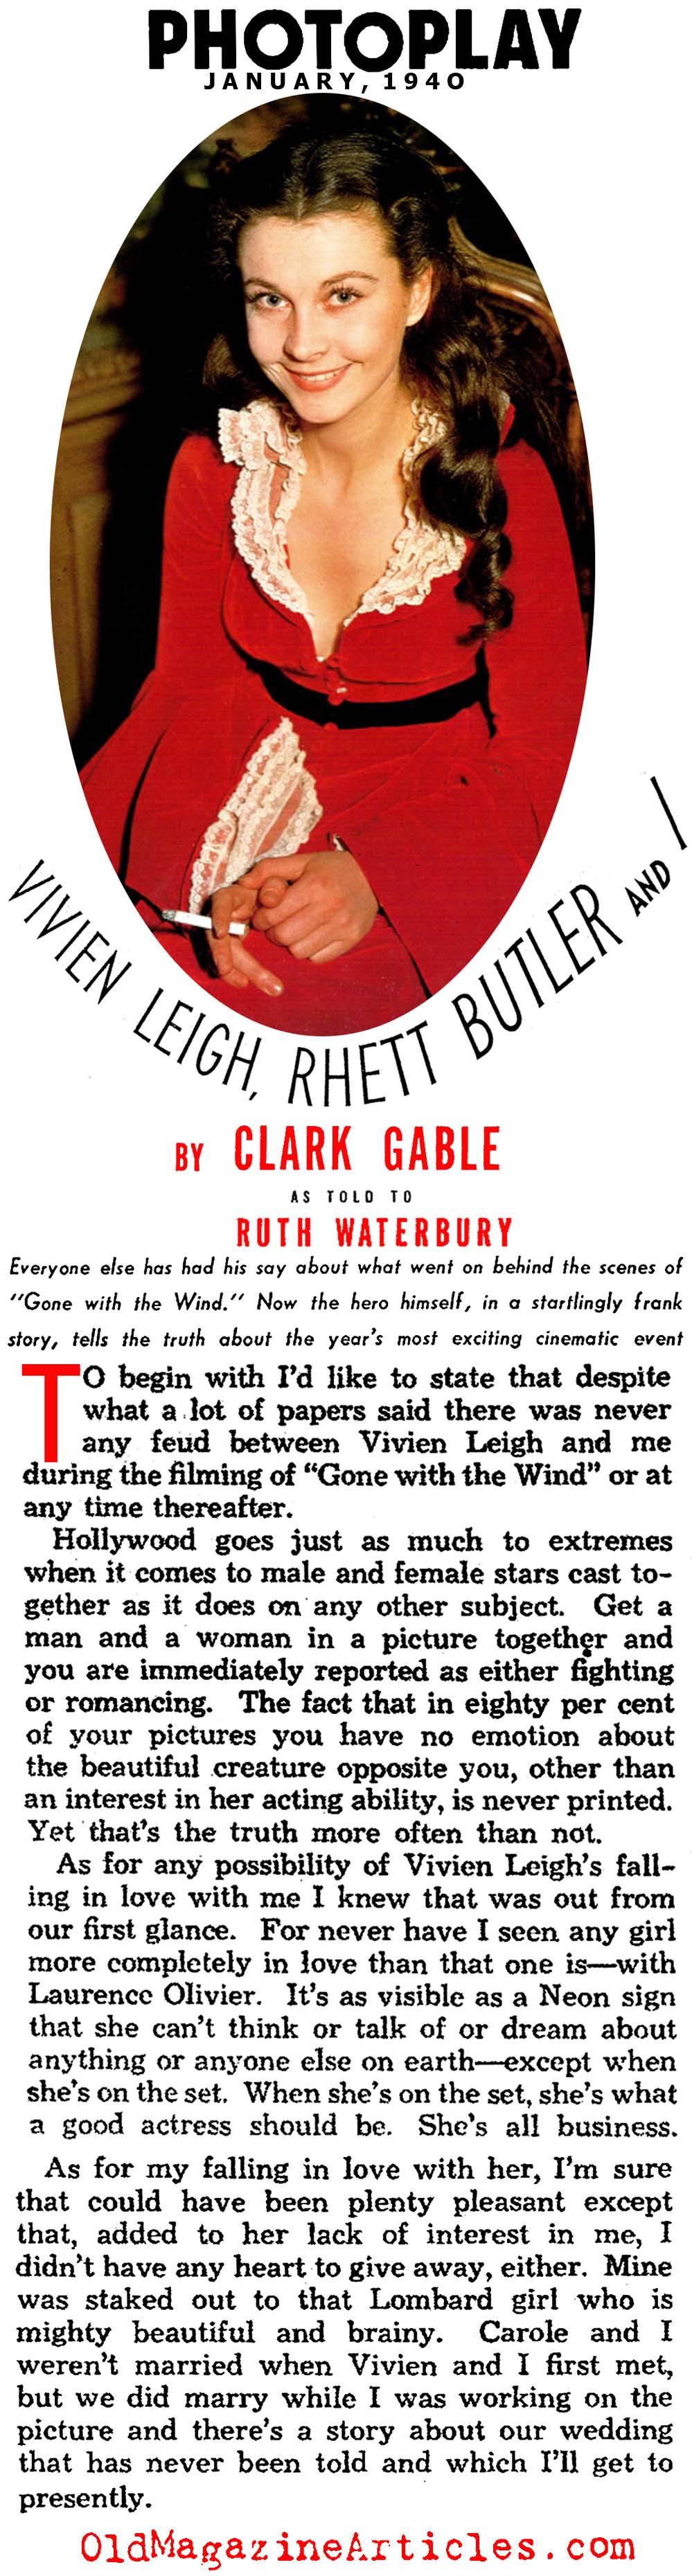 Behind the Scenes with Clark Gable... (Photoplay Magazine, 1940)